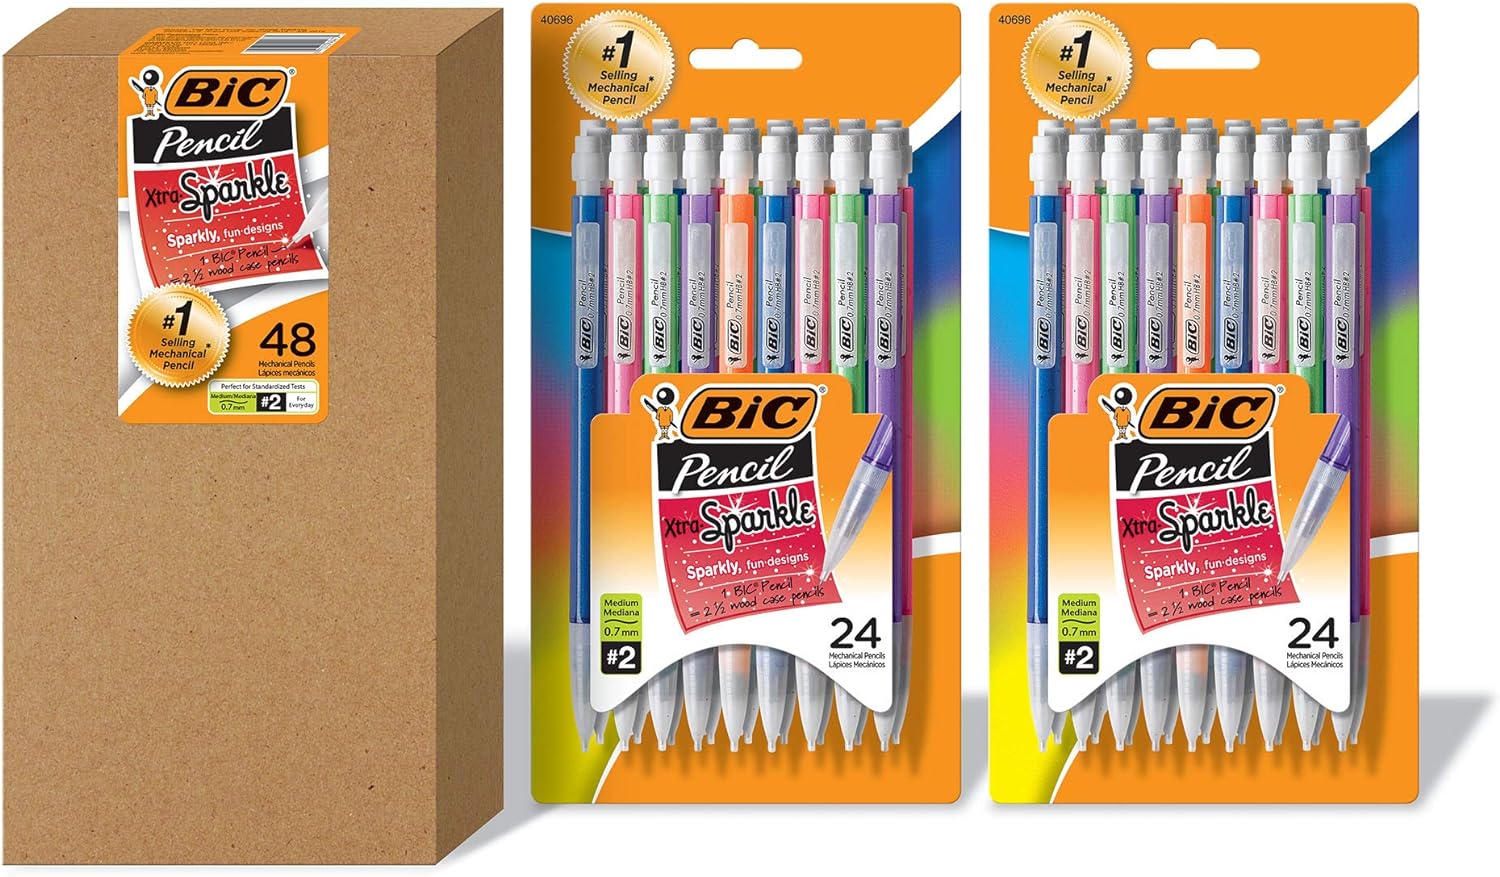  BIC Xtra-Sparkle Mechanical Pencil, Medium Point (0.7mm), Fun Design With Colorful Barrel, 15-Count 